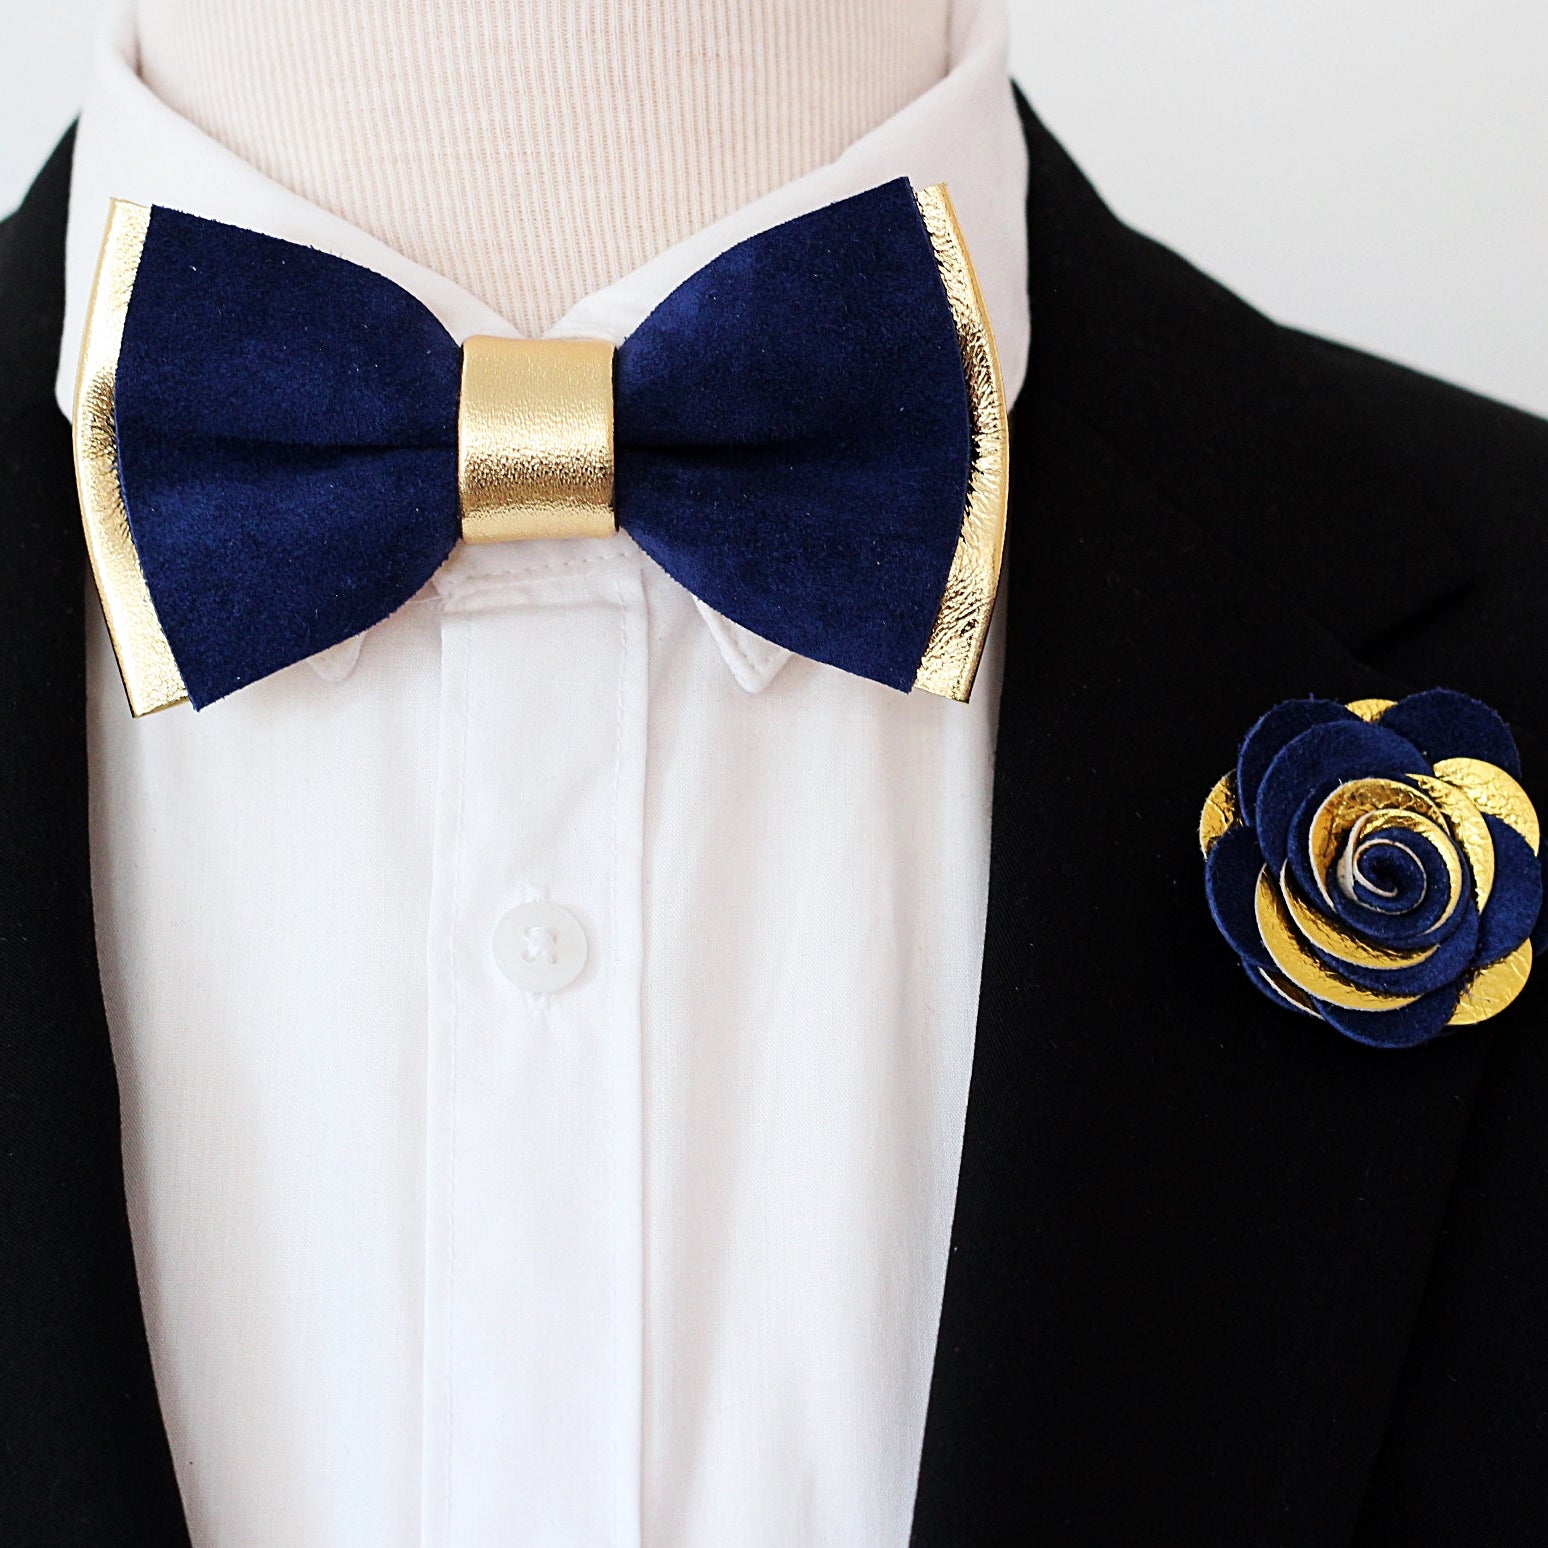 Gold and royal blue leather bow tie, pin set groomsmen attire